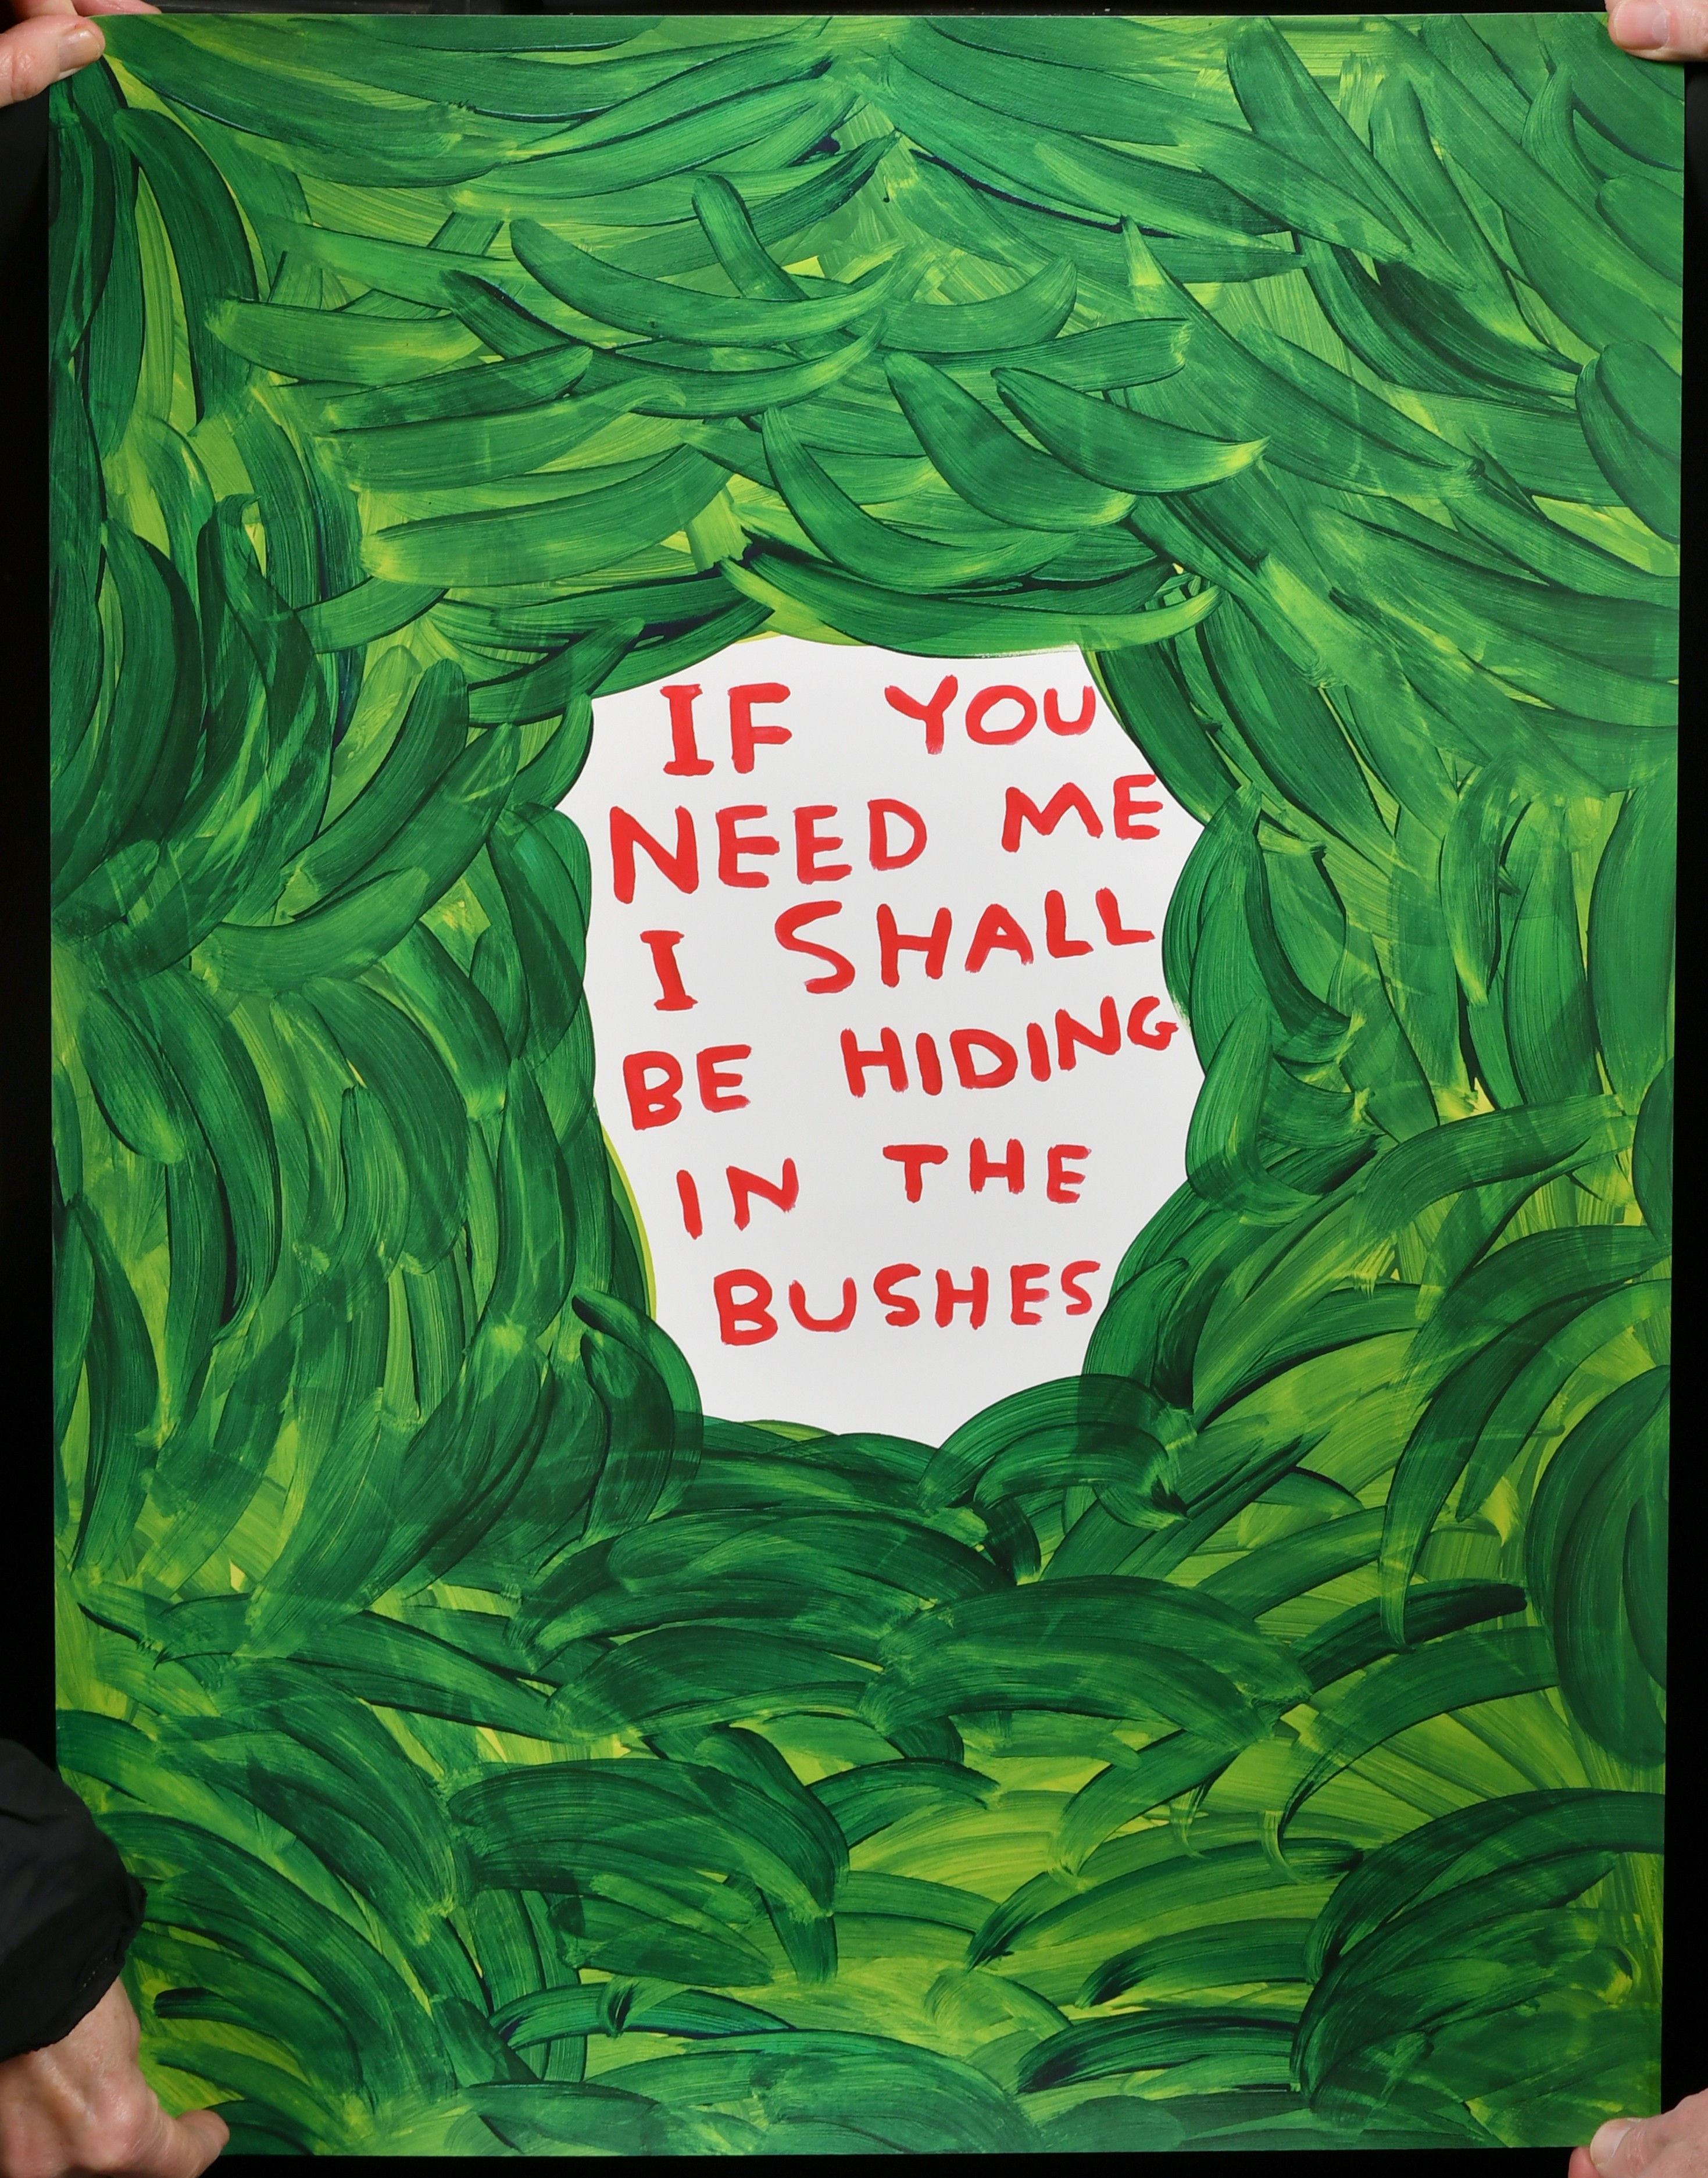 David Shrigley (1968- ) British. "If You Need Me I Shall Be Hiding In The Bushes", Lithograph, - Image 2 of 2